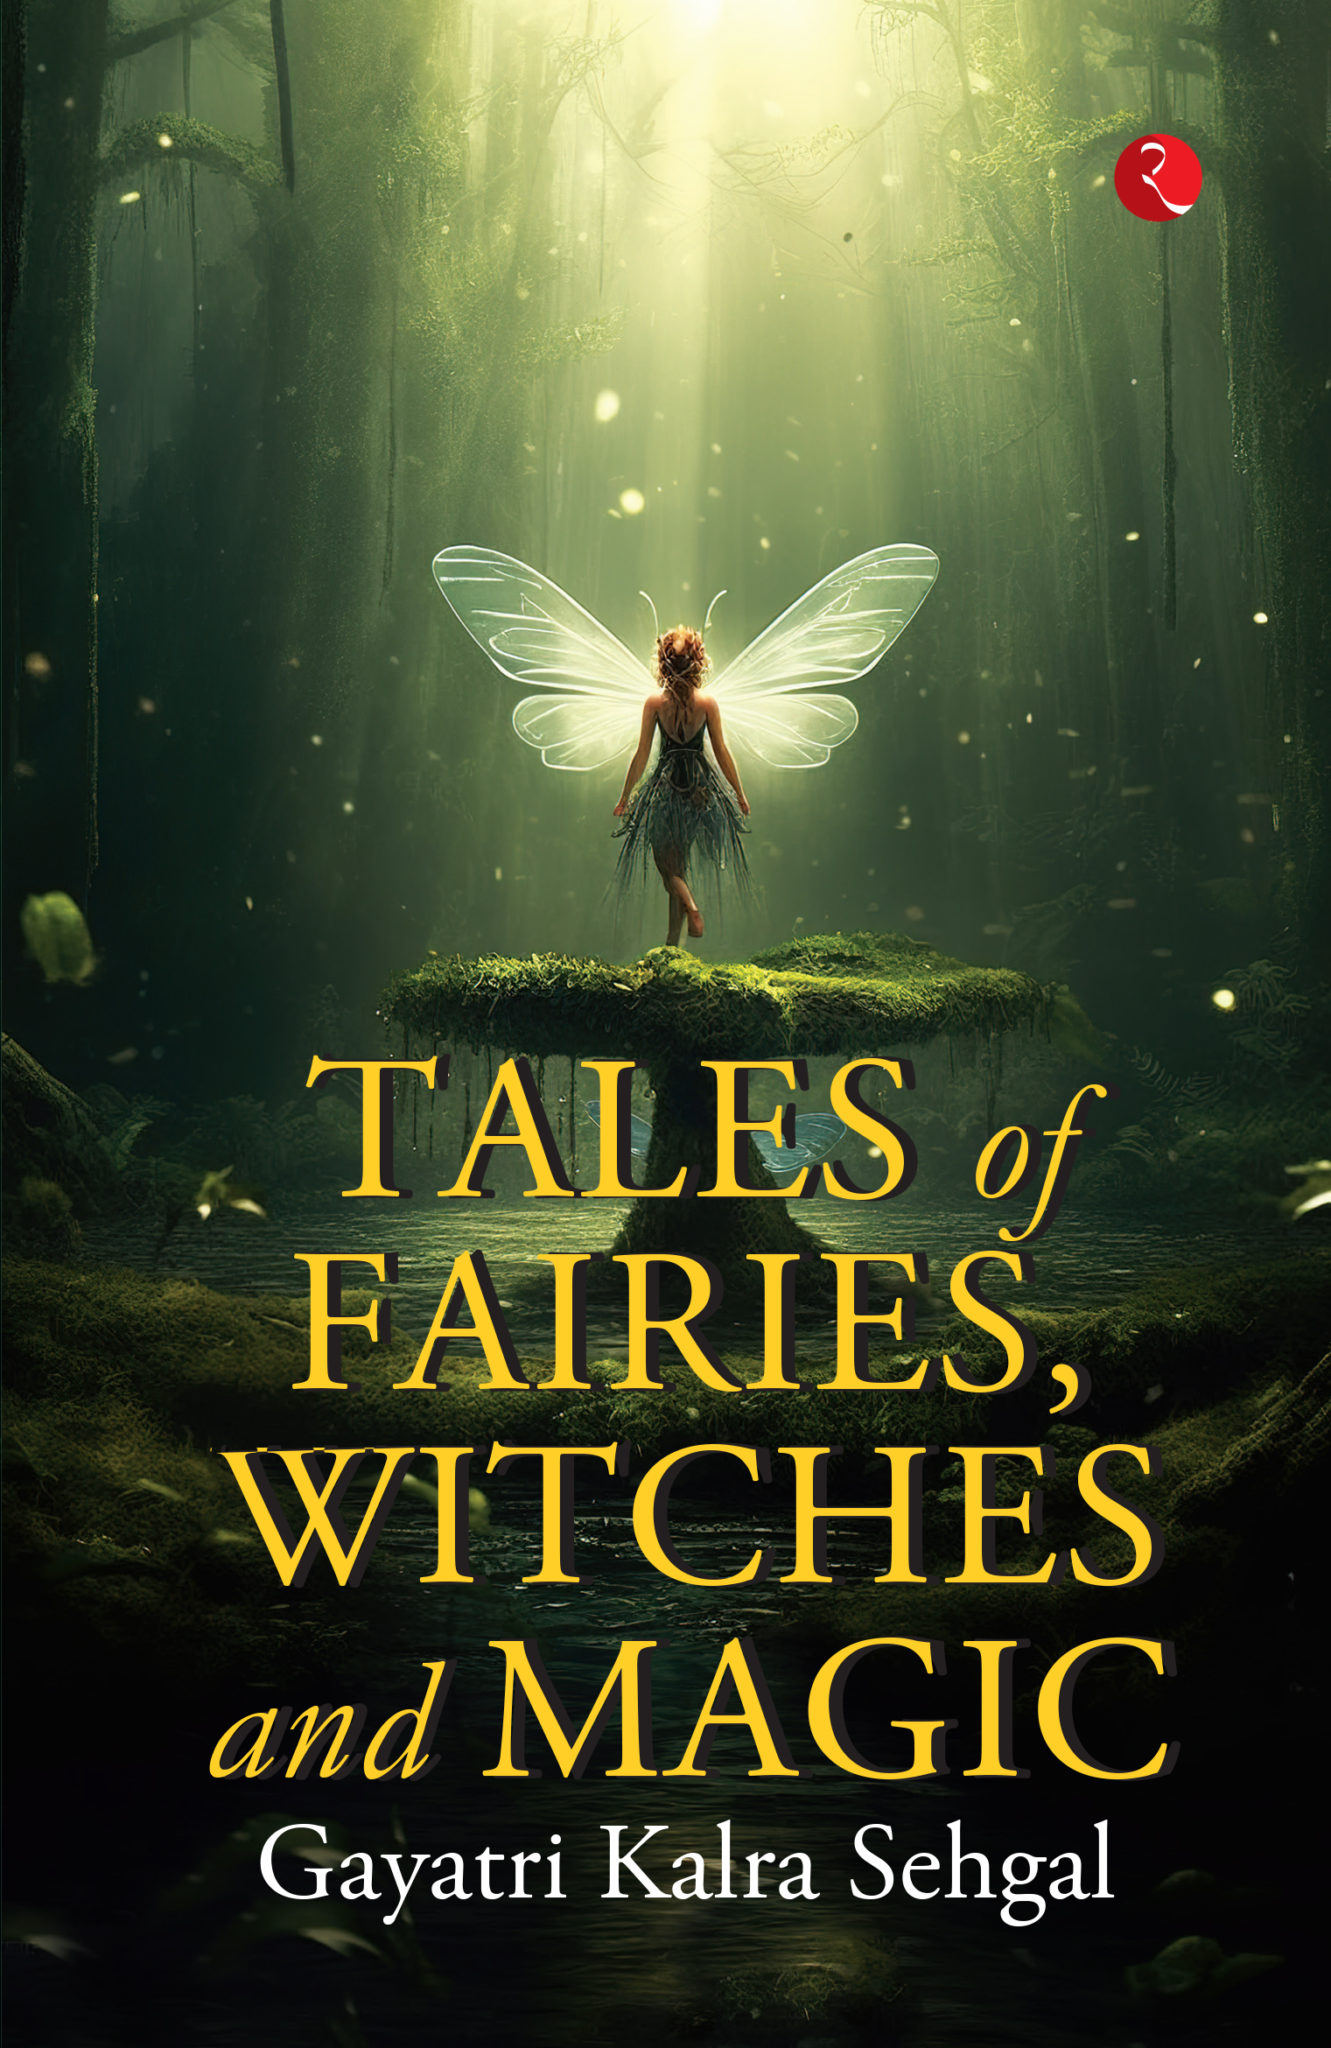 TALES OF FAIRIES, WITCHES AND MAGIC | Rupa Publications